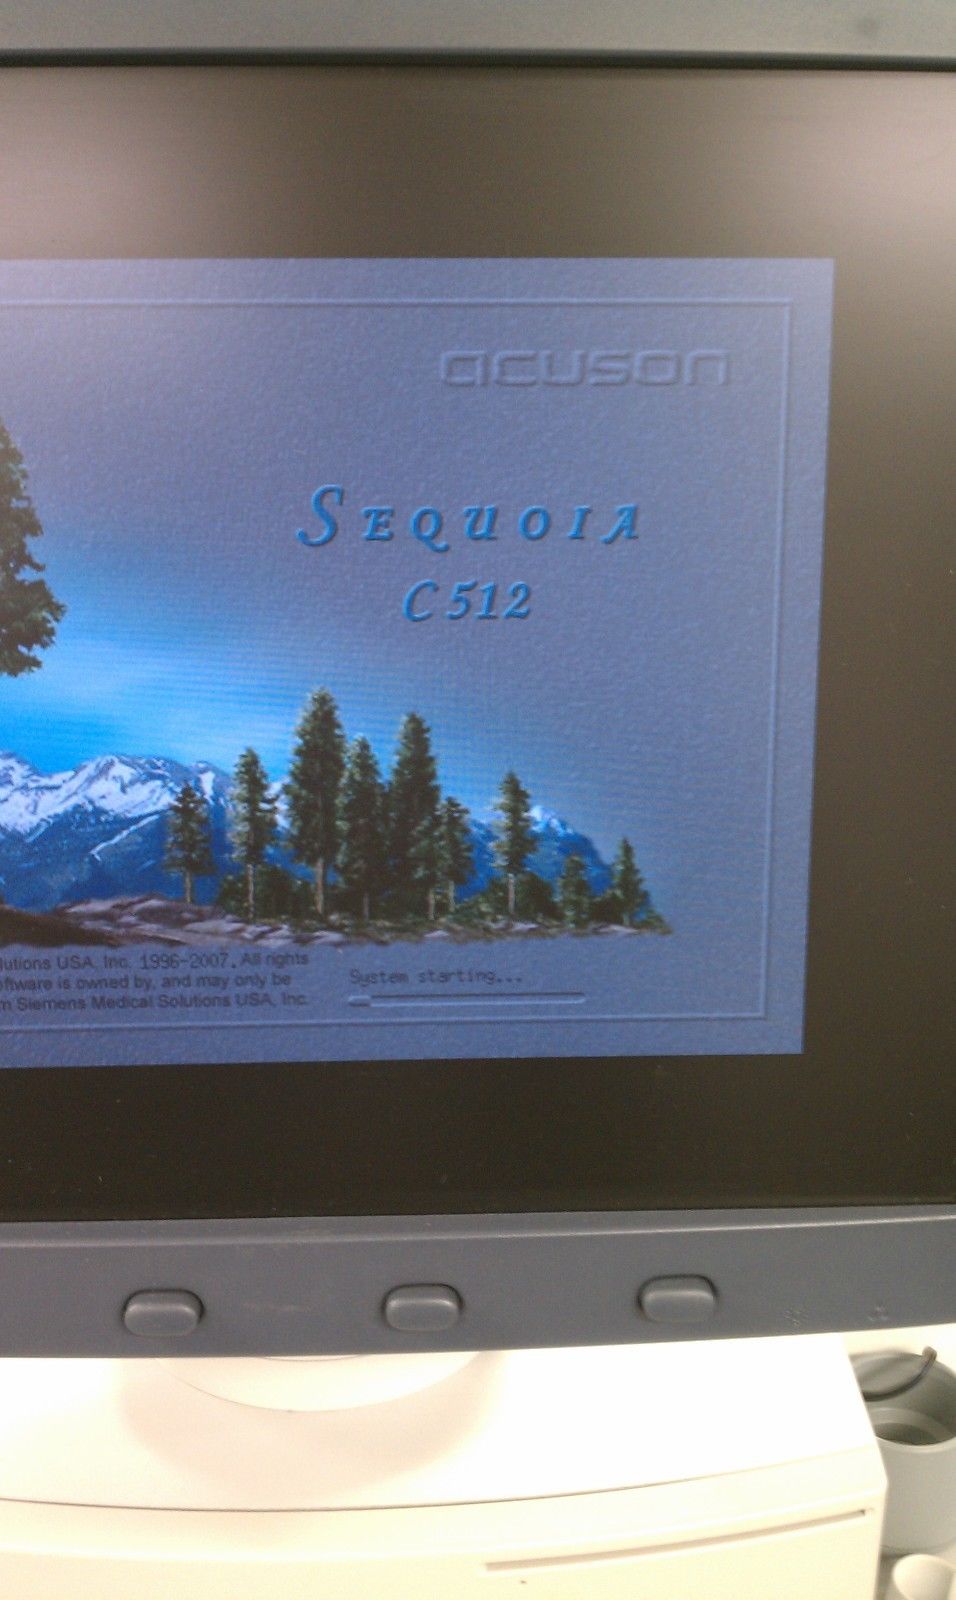 Acuson Sequoia 512 Ultrasound System with 17L5 HD Probe - Mint Condition! DIAGNOSTIC ULTRASOUND MACHINES FOR SALE